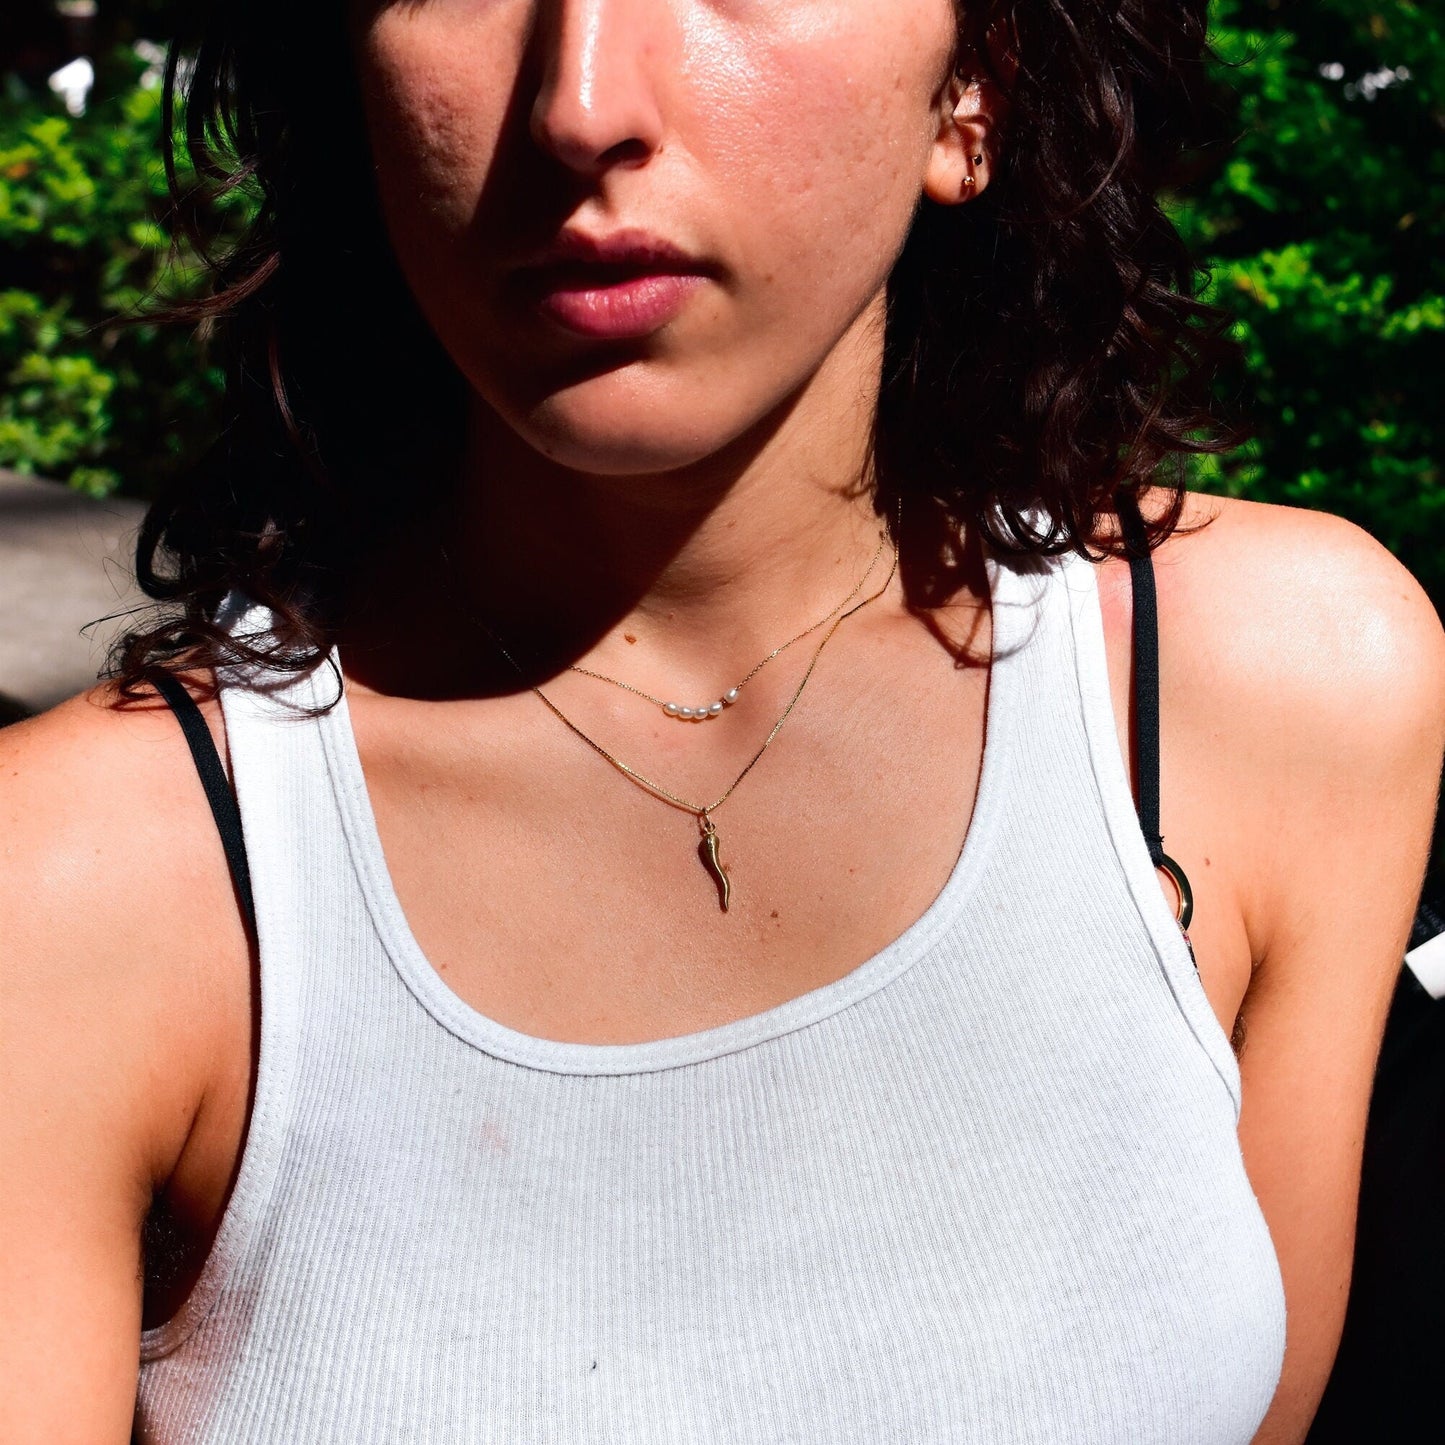 Close-up of a woman wearing a small gold Italian horn charm necklace against her skin, with green foliage visible in the background on a sunny day.